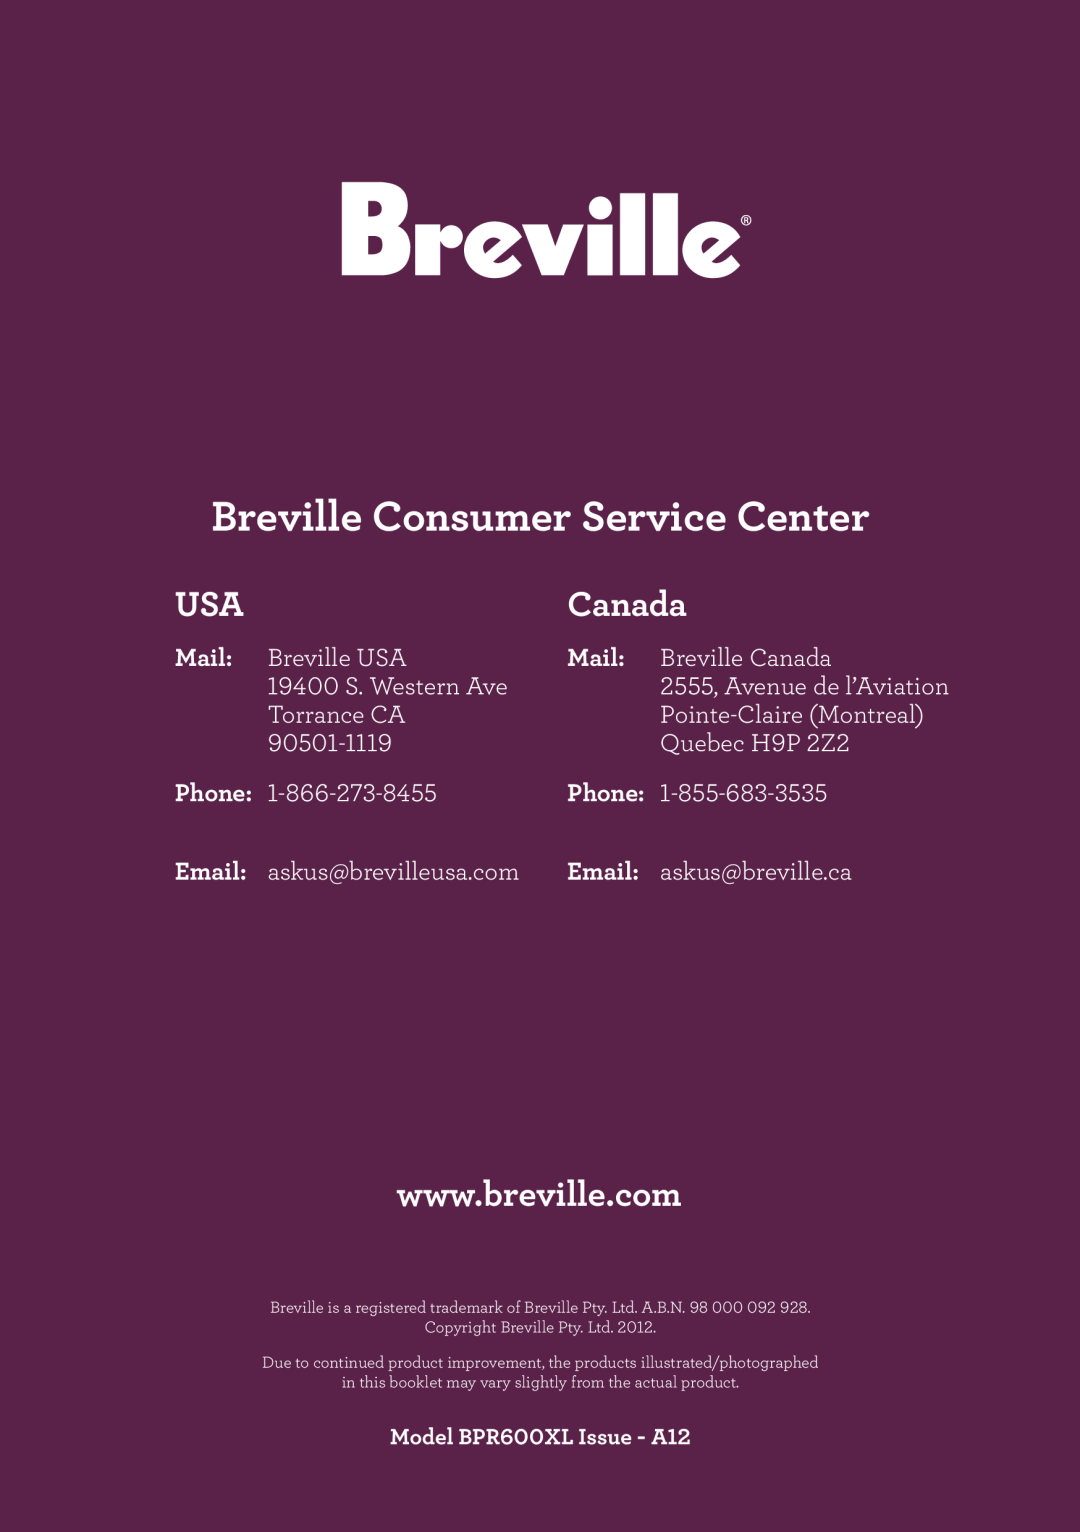 Breville BPR600XL Issue - A12 manual Mail, Phone, Email, Breville Consumer Service Center, Canada 